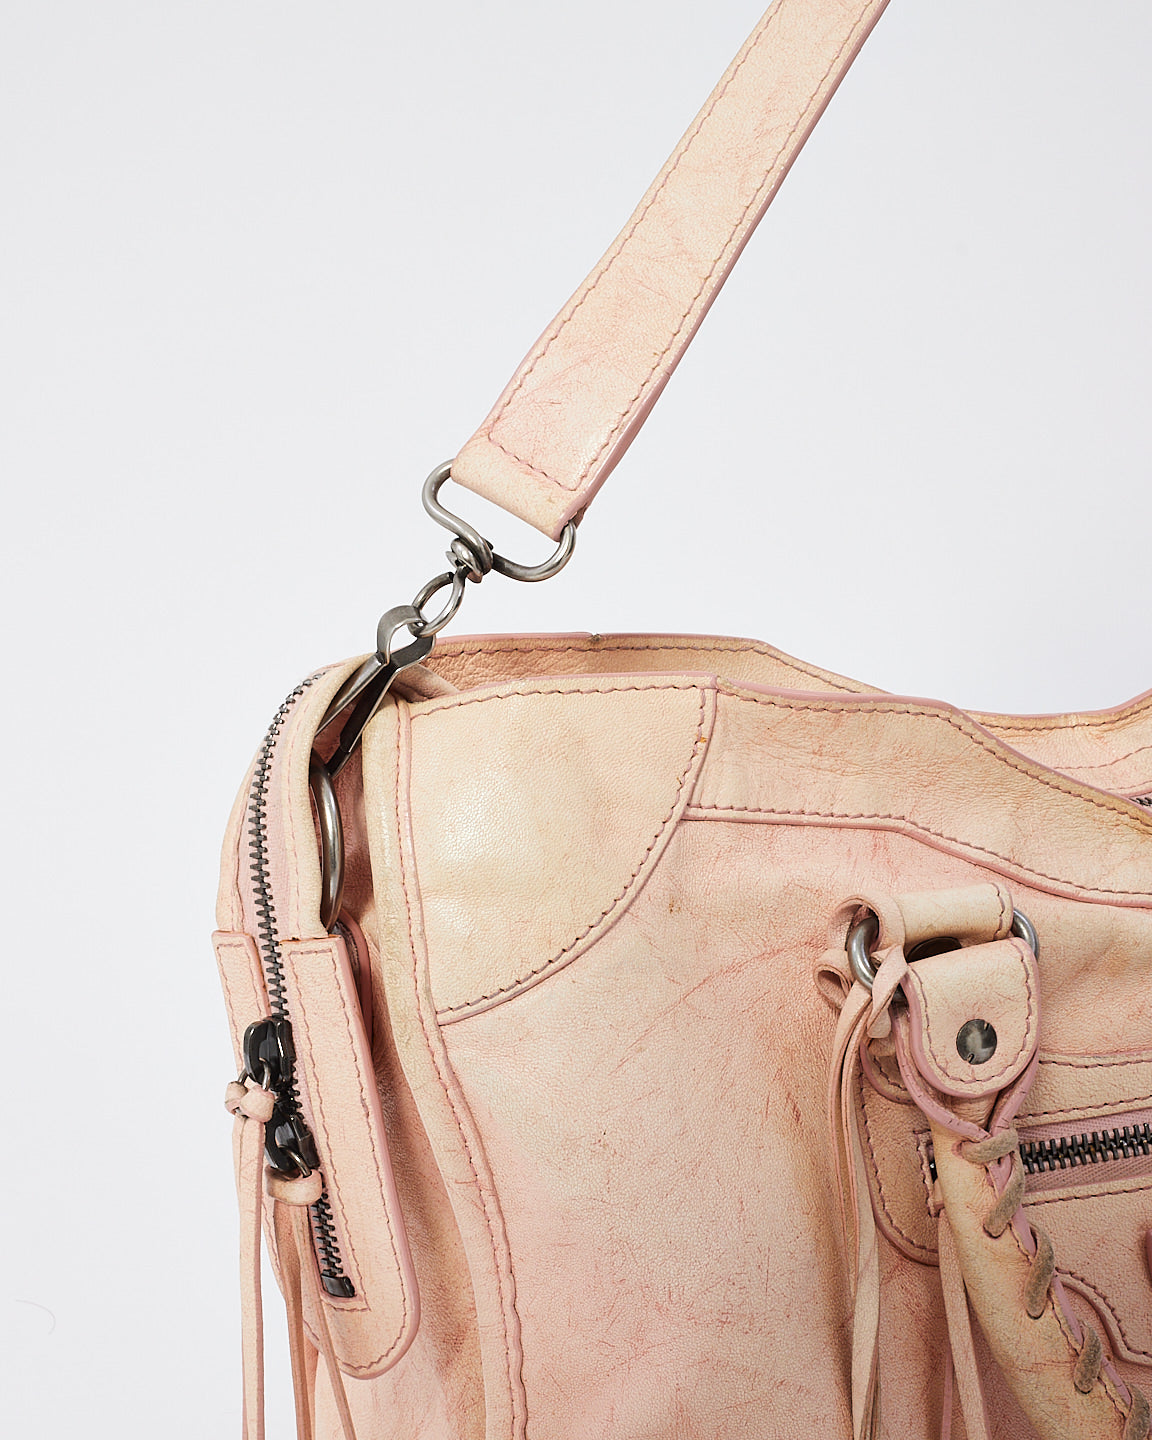 Balenciaga Pink Leather City Bag with Hammered Studs